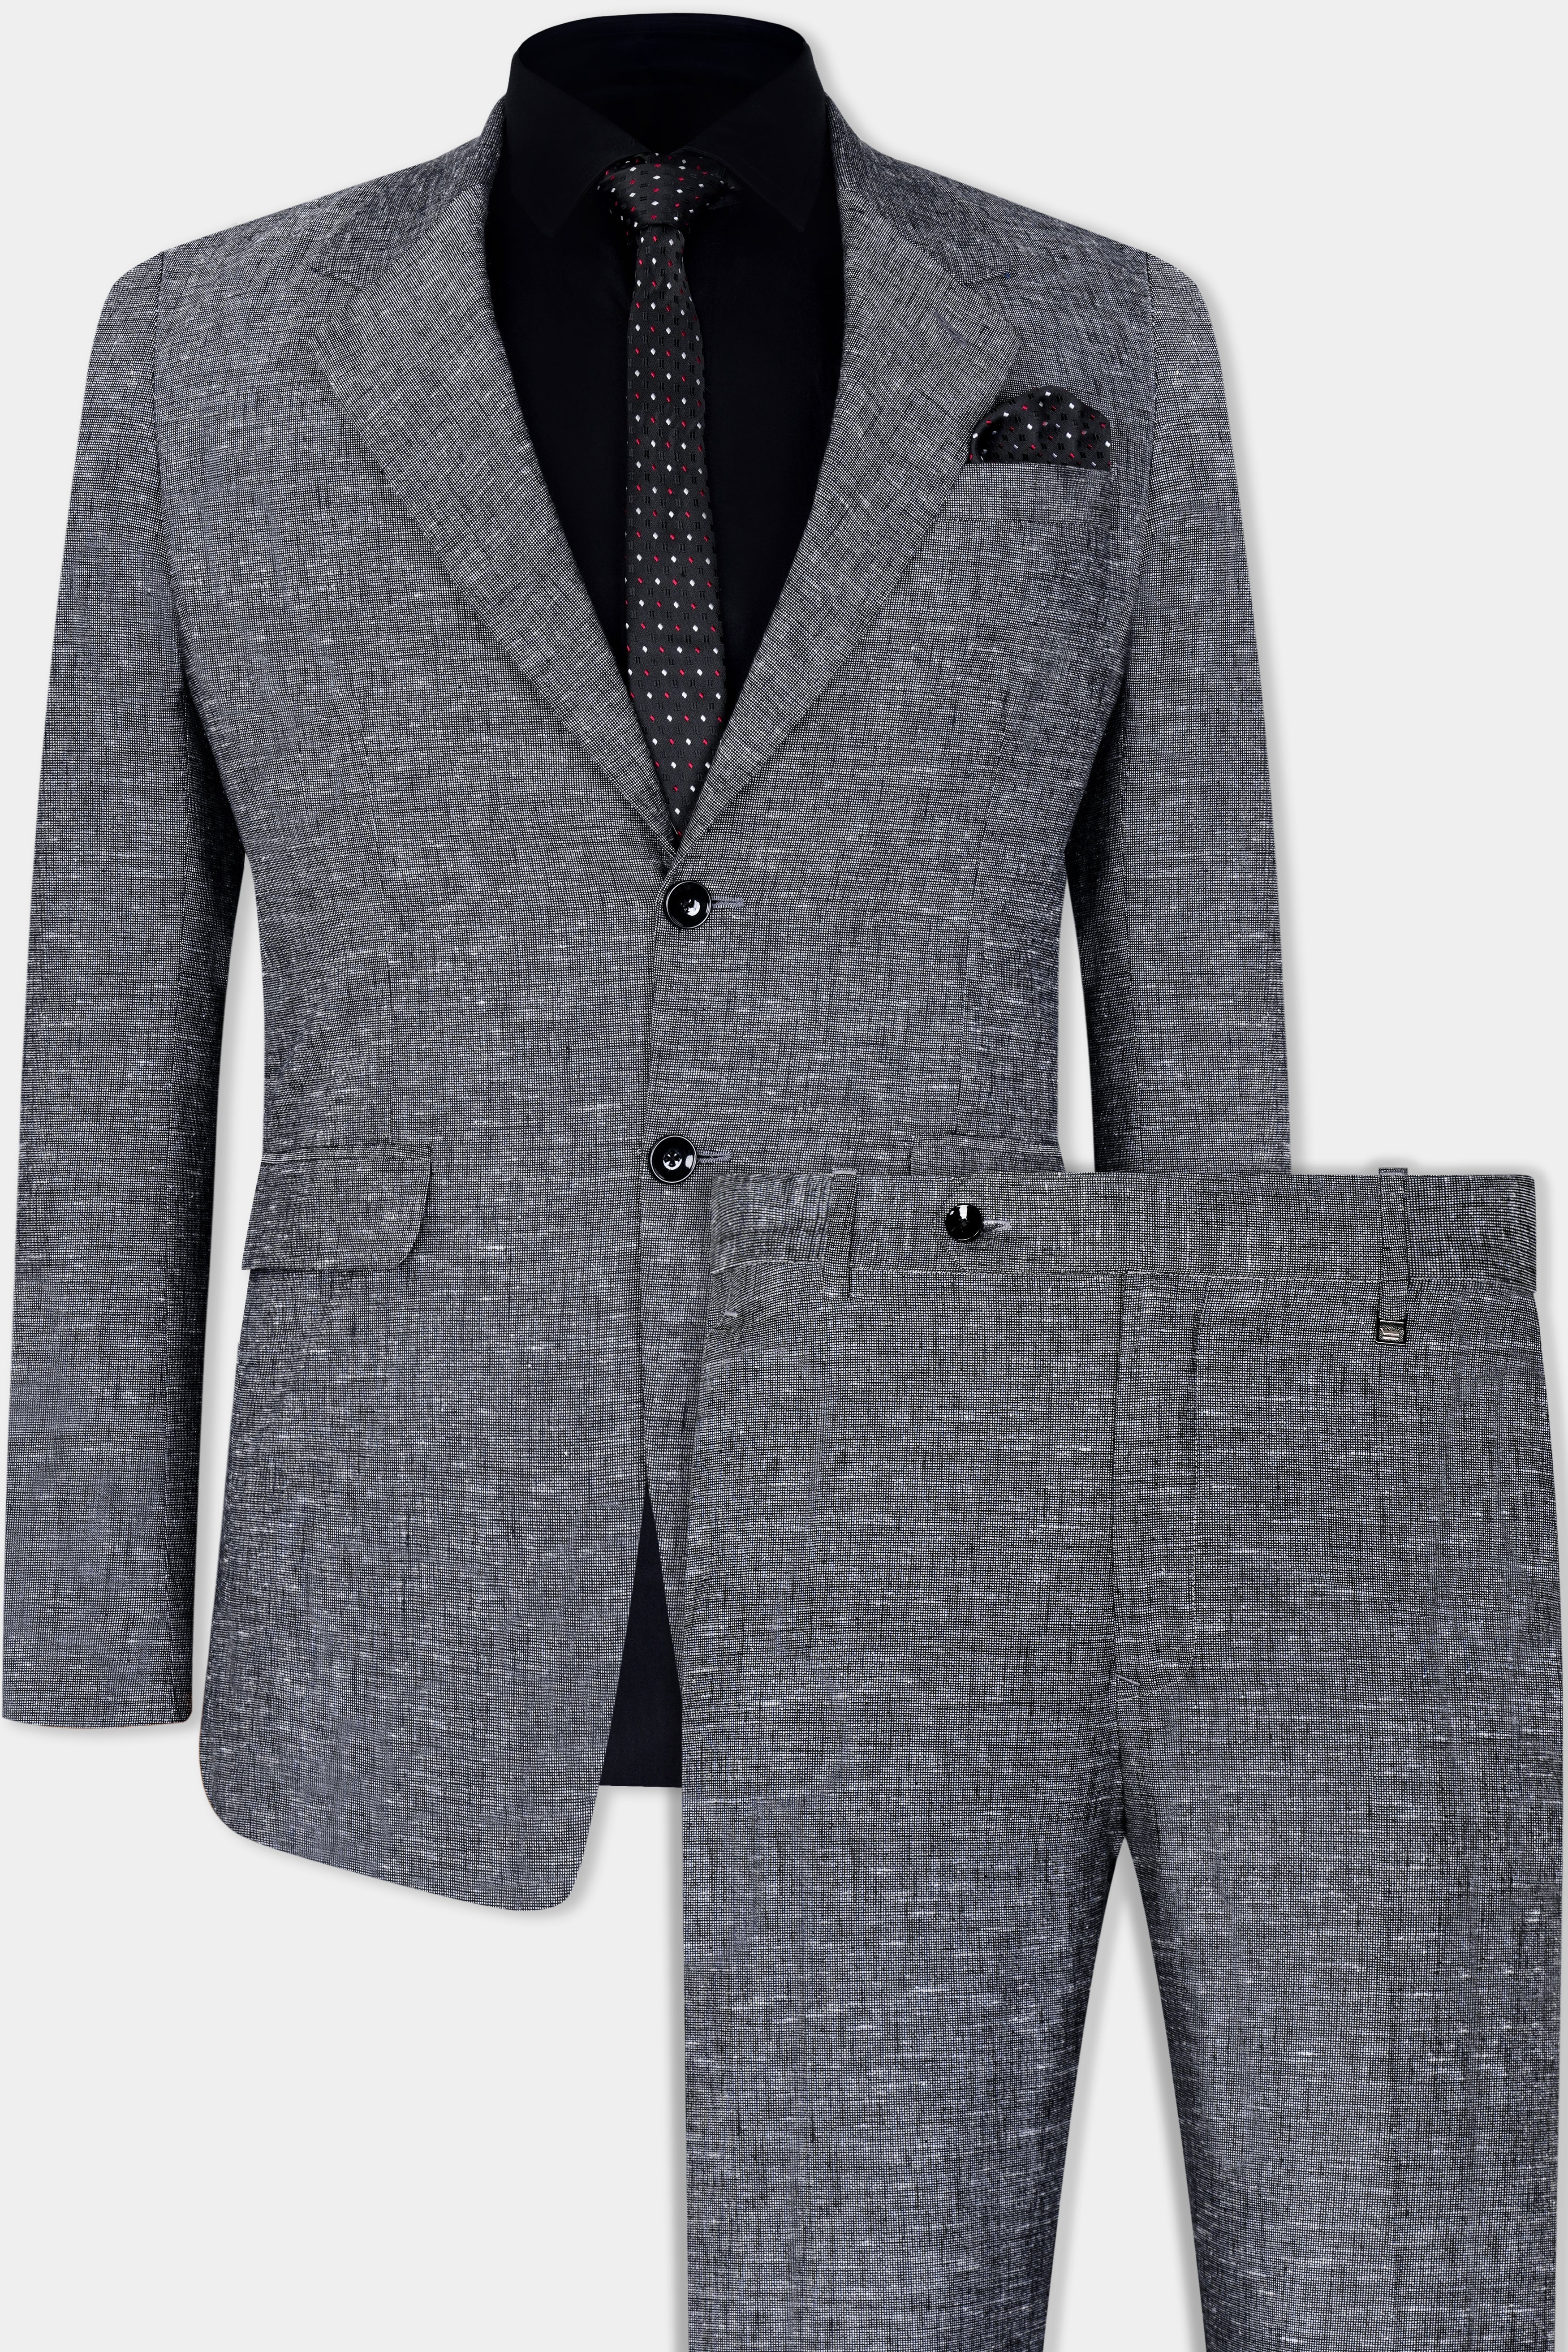 Dim Gray Luxurious Linen Single Breasted Suit ST2923-SB-36, ST2923-SB-38, ST2923-SB-40, ST2923-SB-42, ST2923-SB-44, ST2923-SB-46, ST2923-SB-48, ST2923-SB-50, ST2923-SB-52, ST2923-SB-54, ST2923-SB-56, ST2923-SB-58, ST2923-SB-60